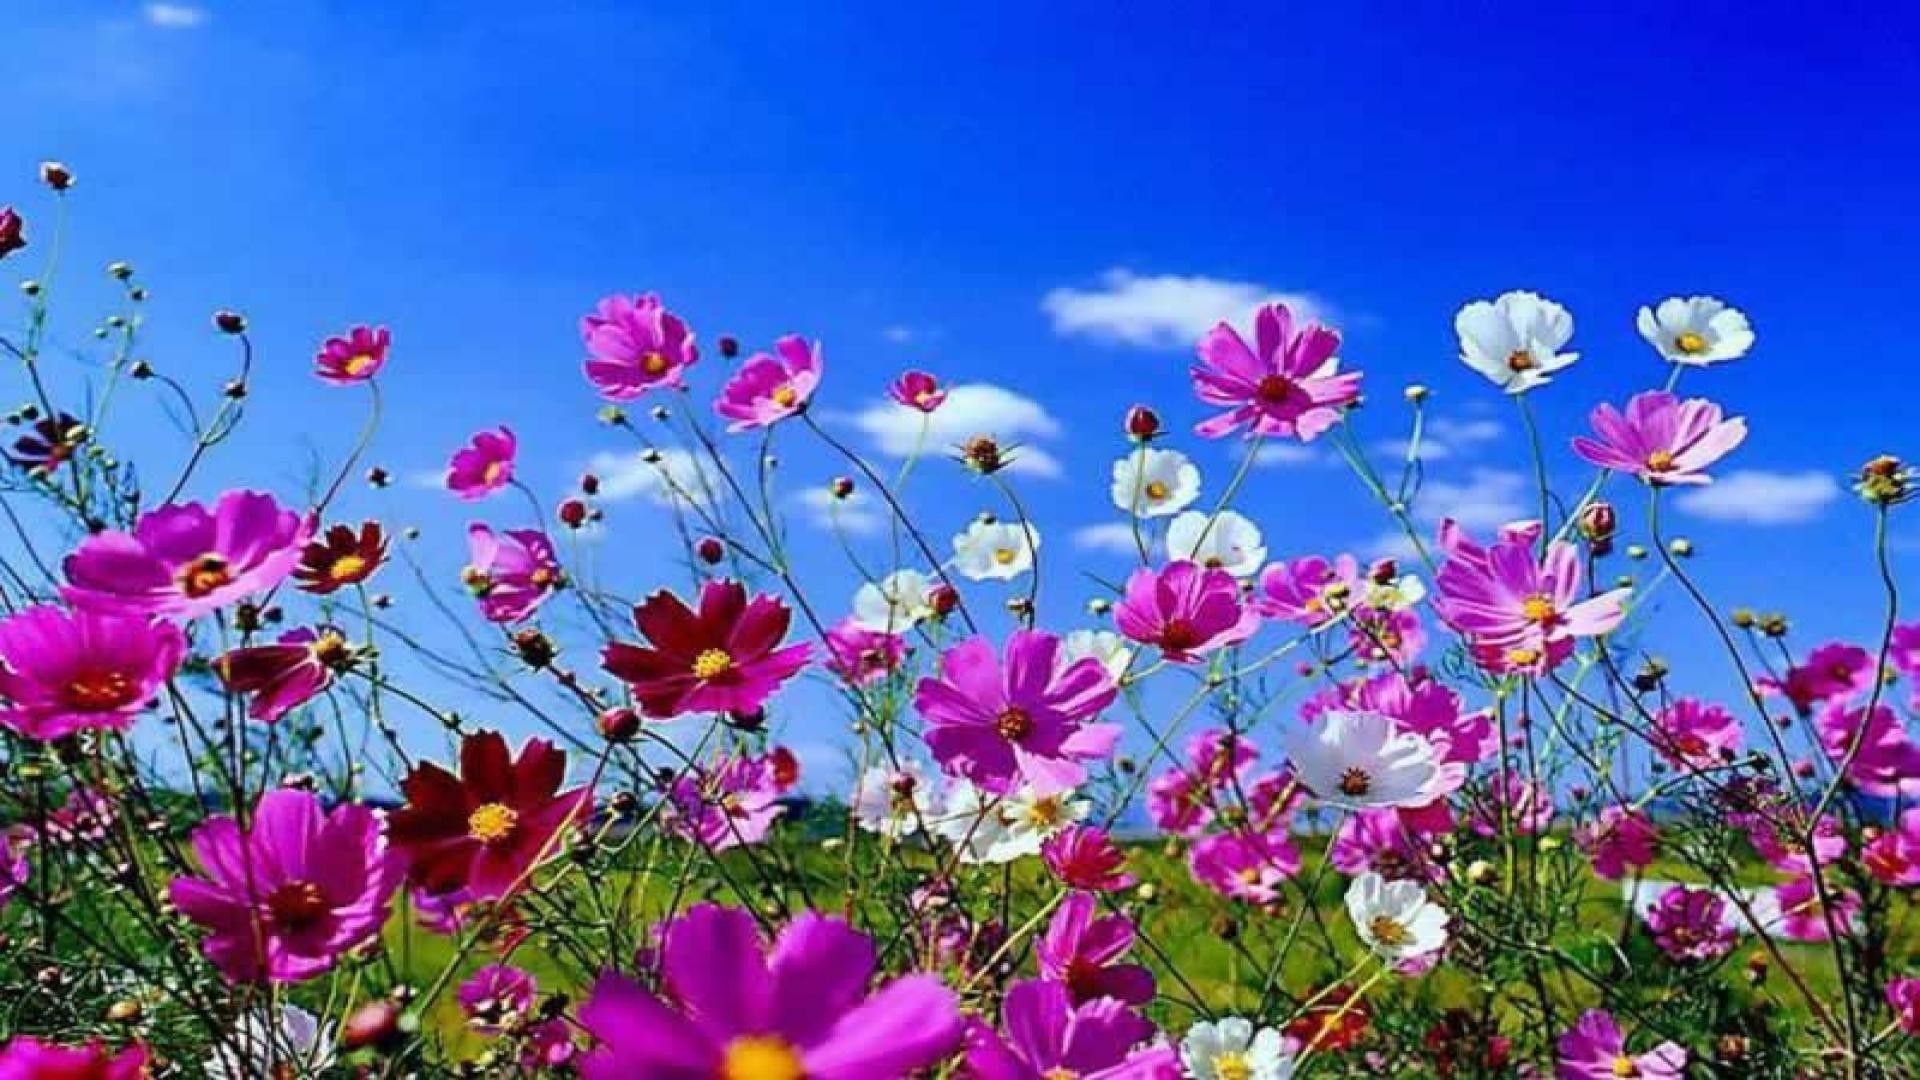 Aesthetic Spring Flowers Wallpaper. HD Background Image. Photo